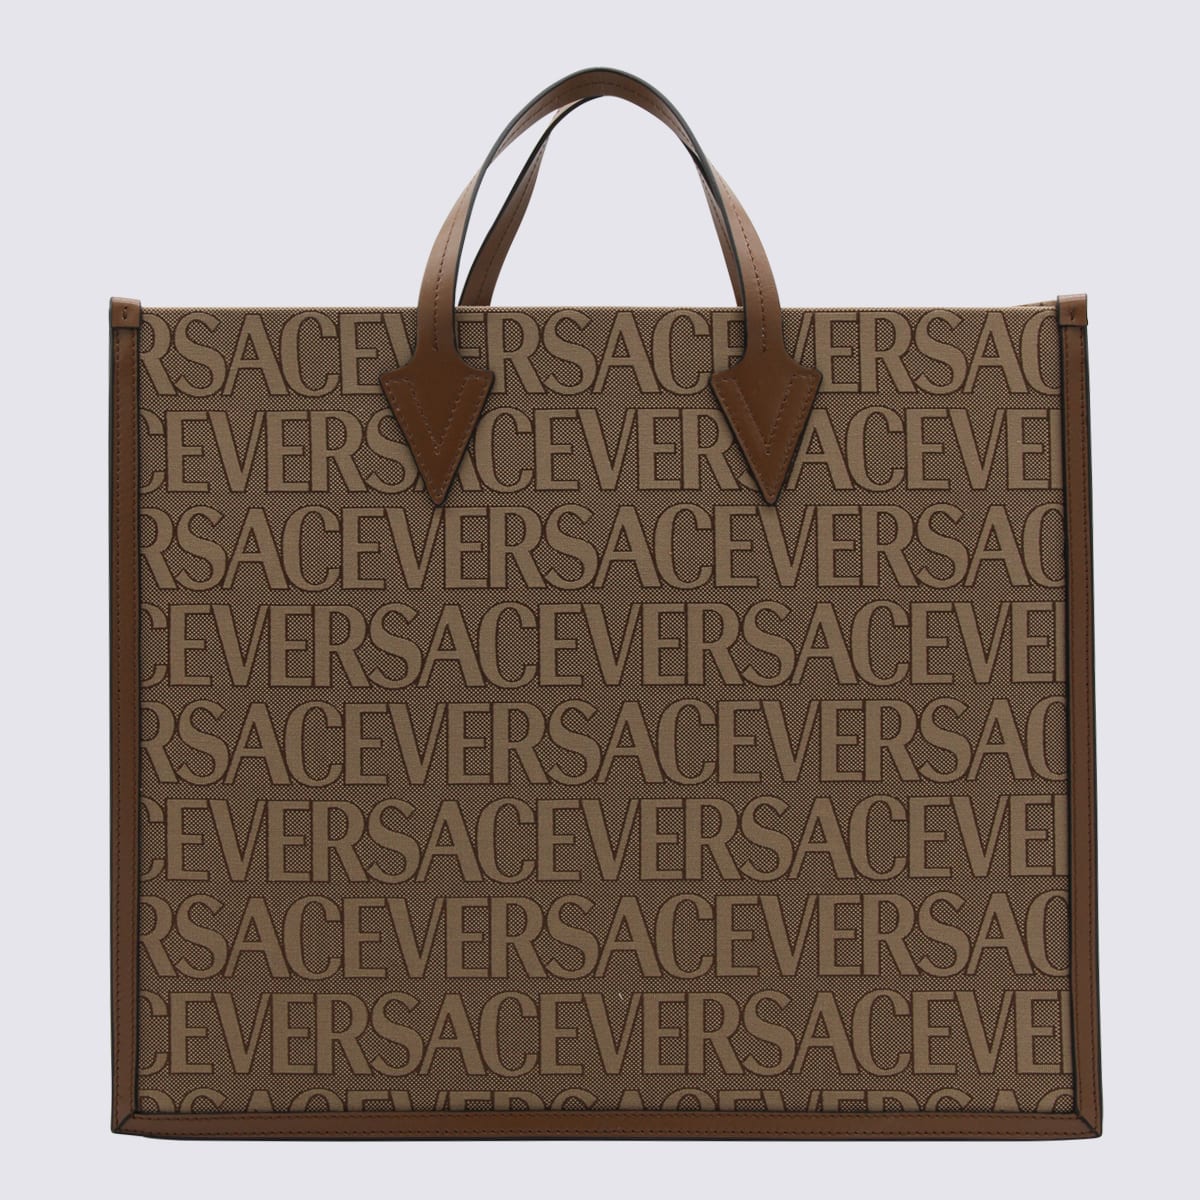 Versace Brown Canvas And Leather Allover Tote Bag In Beige